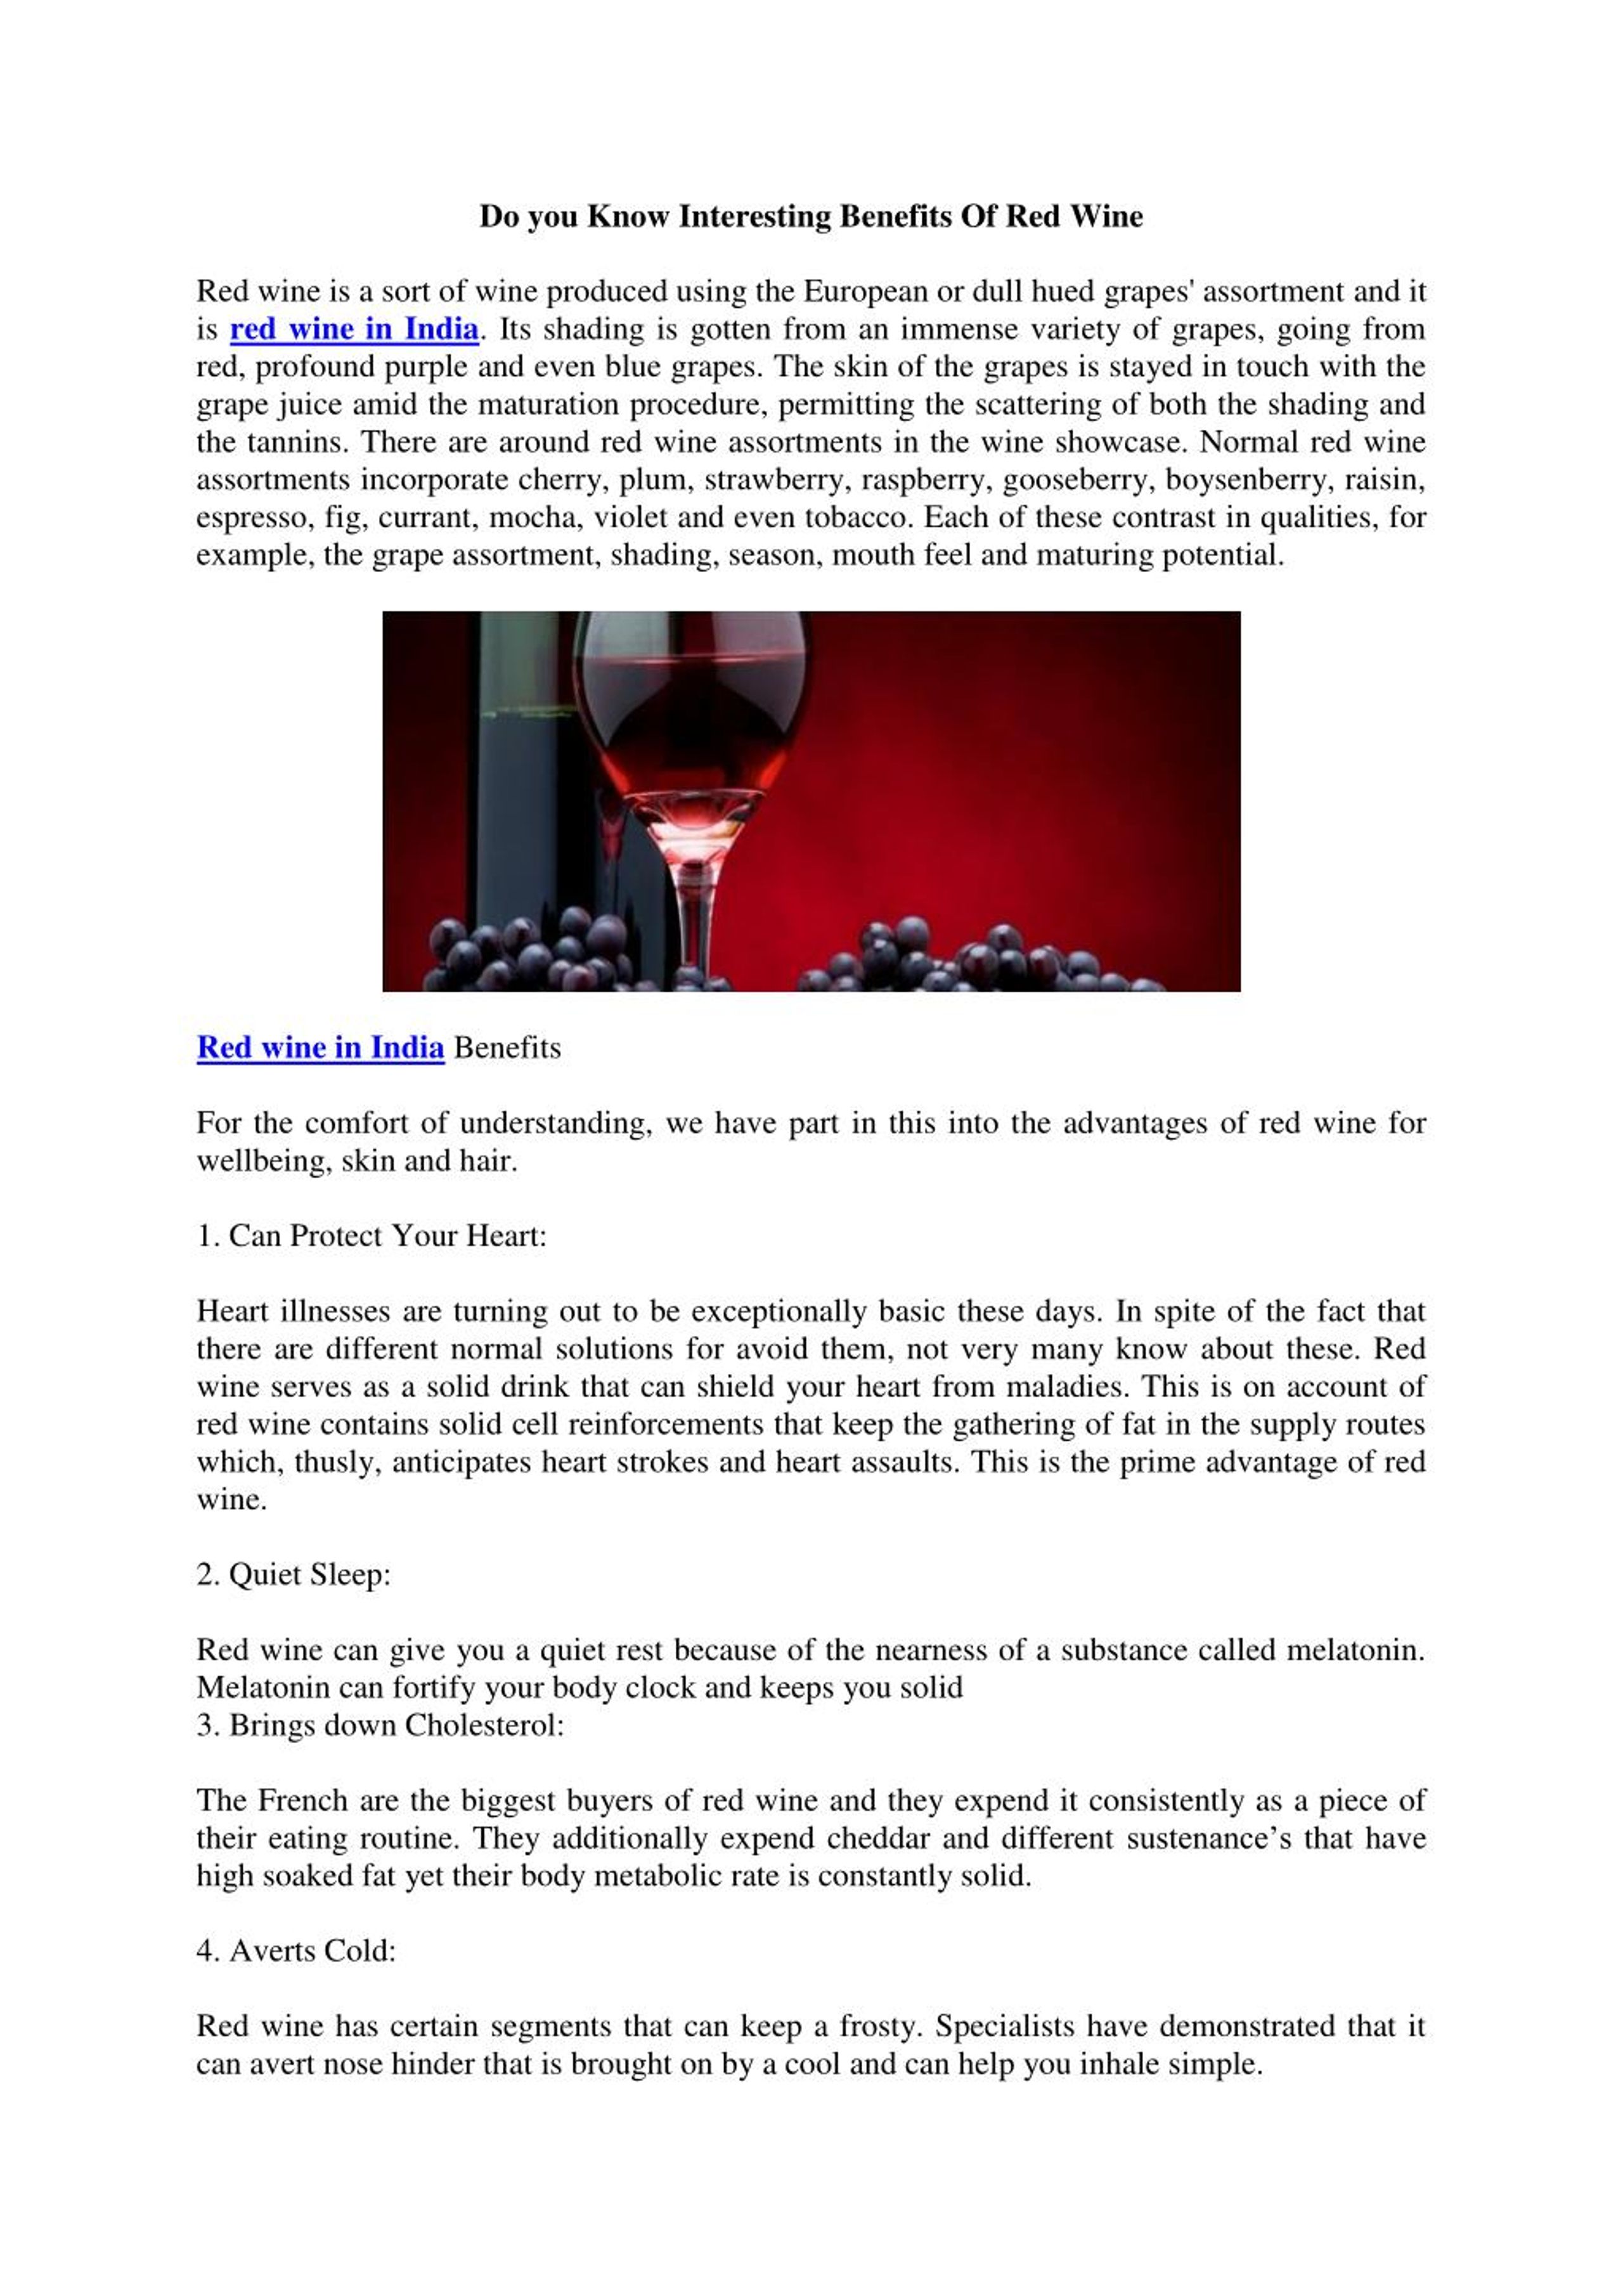 PPT - Do you Know Interesting Benefits Of Red Wine PowerPoint Presentation  - ID:7441749